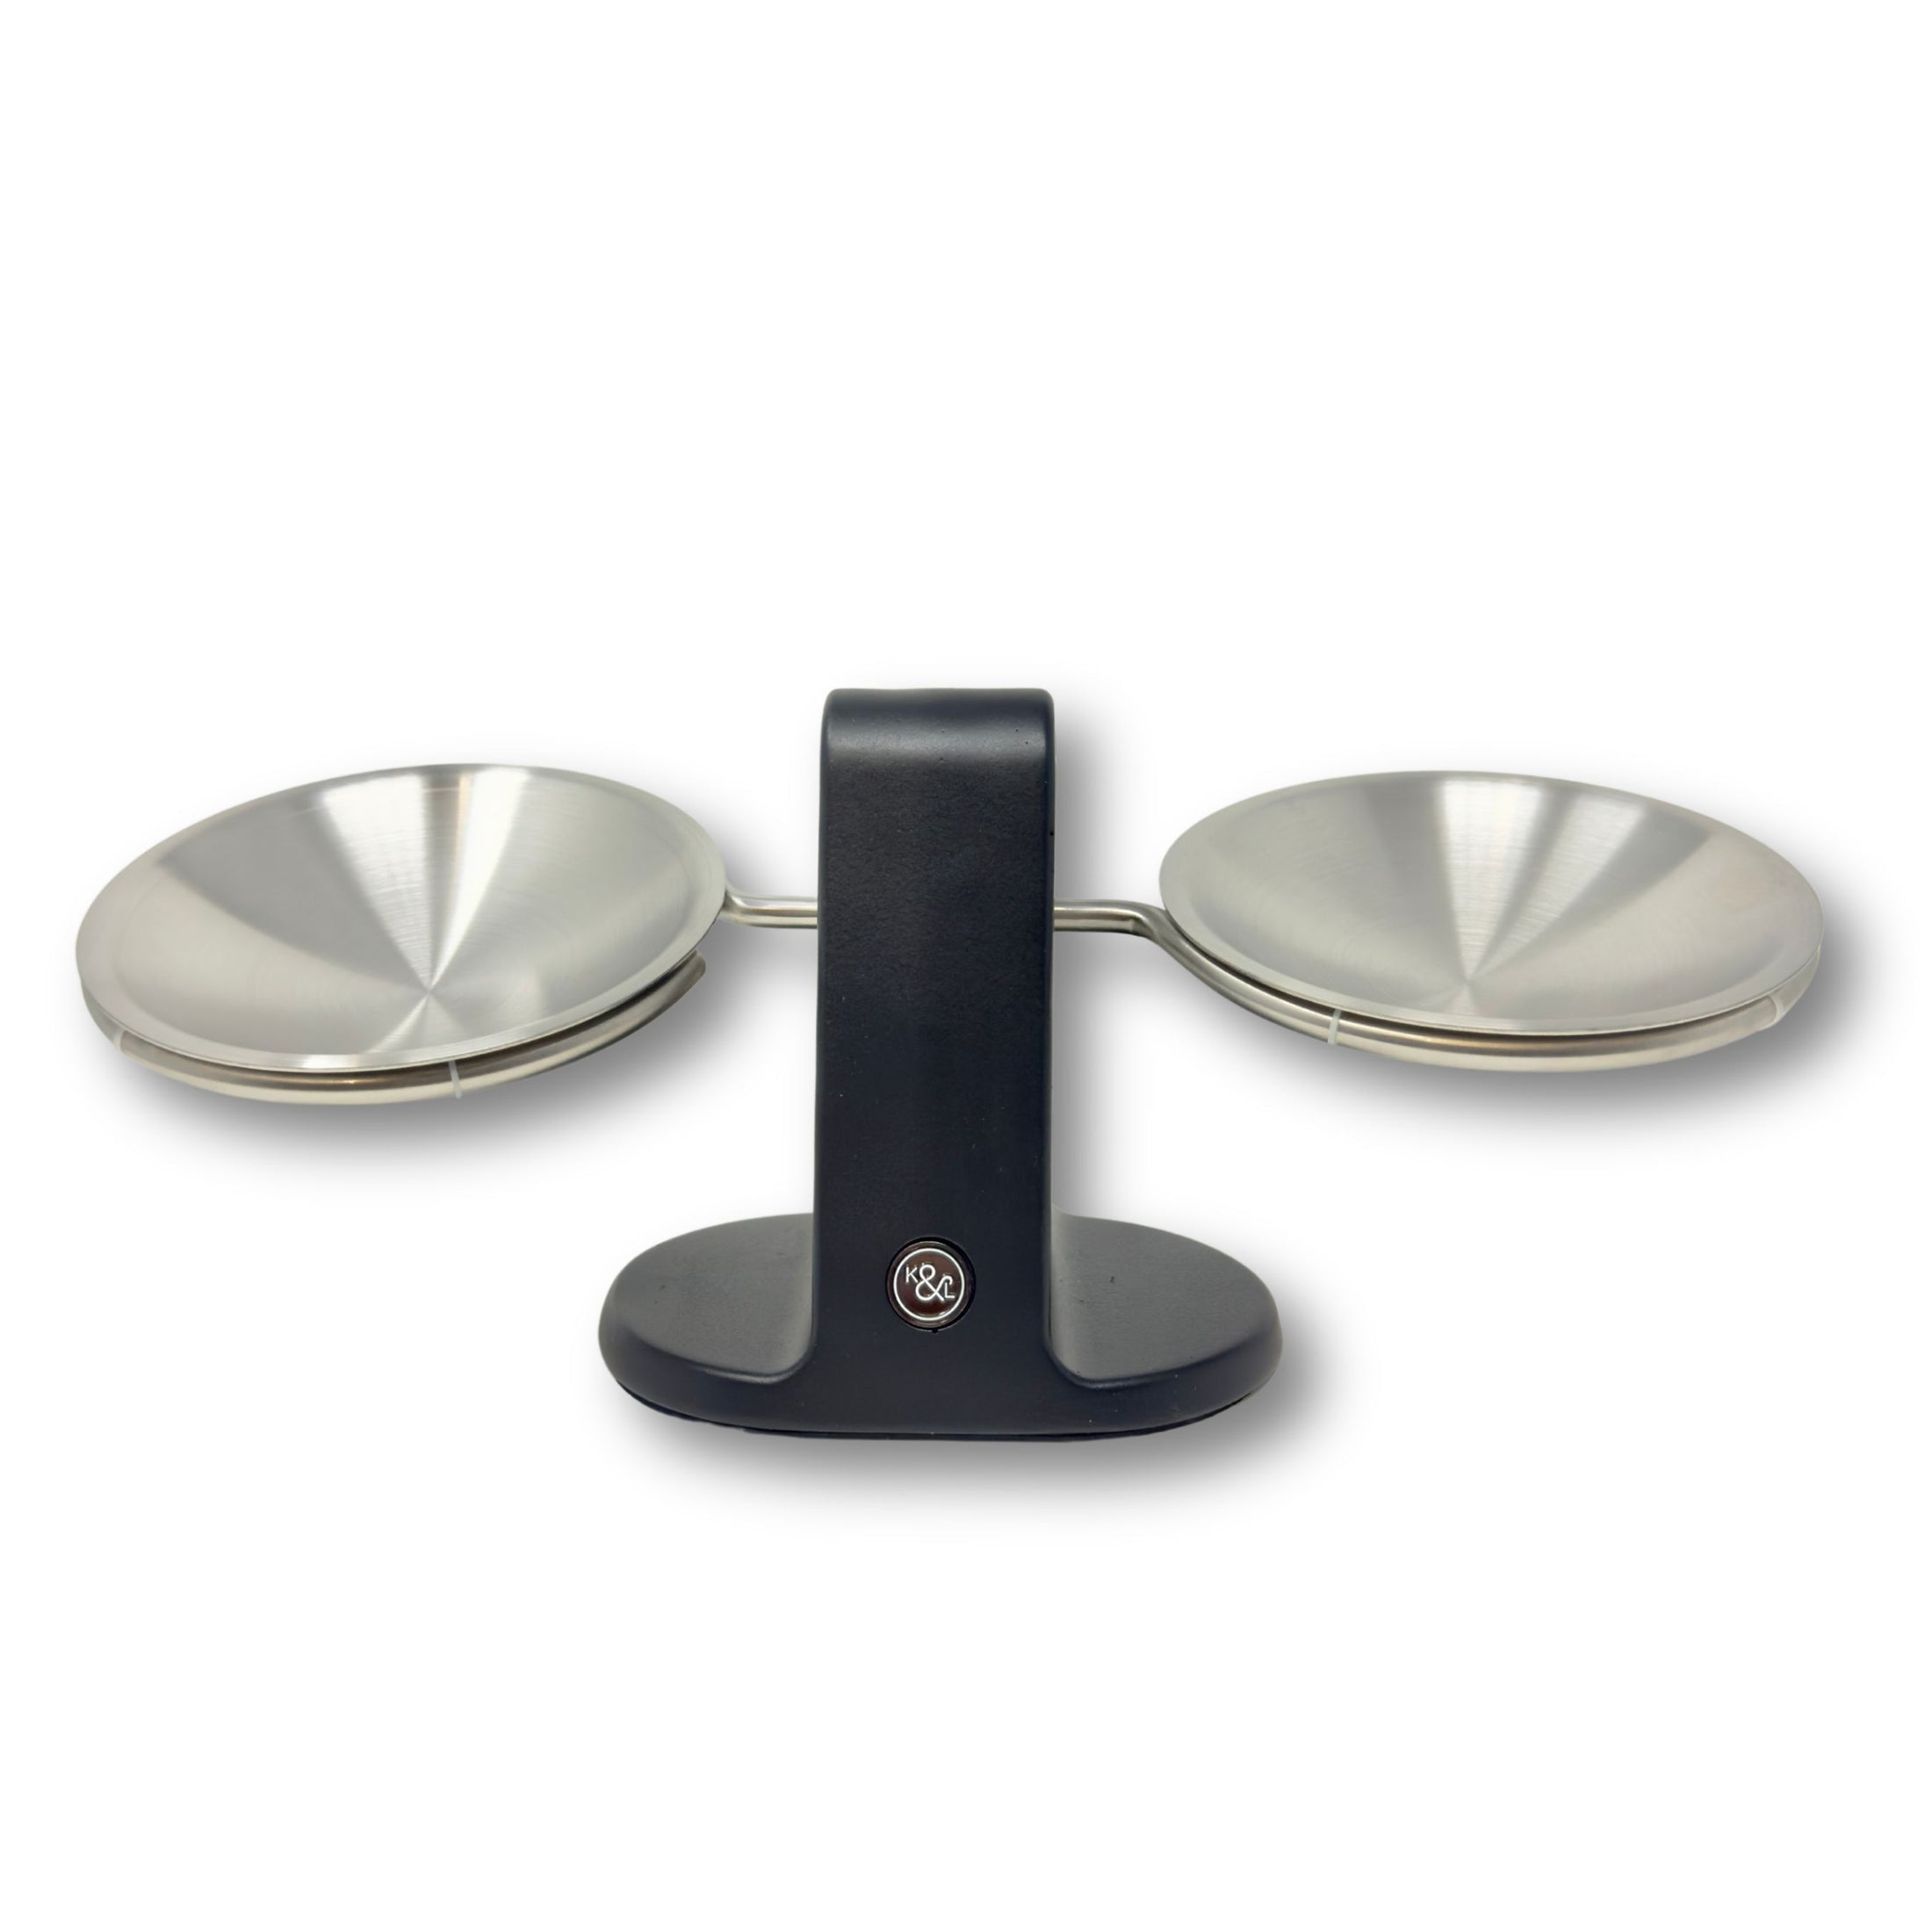 Dine Height Adjustable Cat Food Bowl Black and Silver